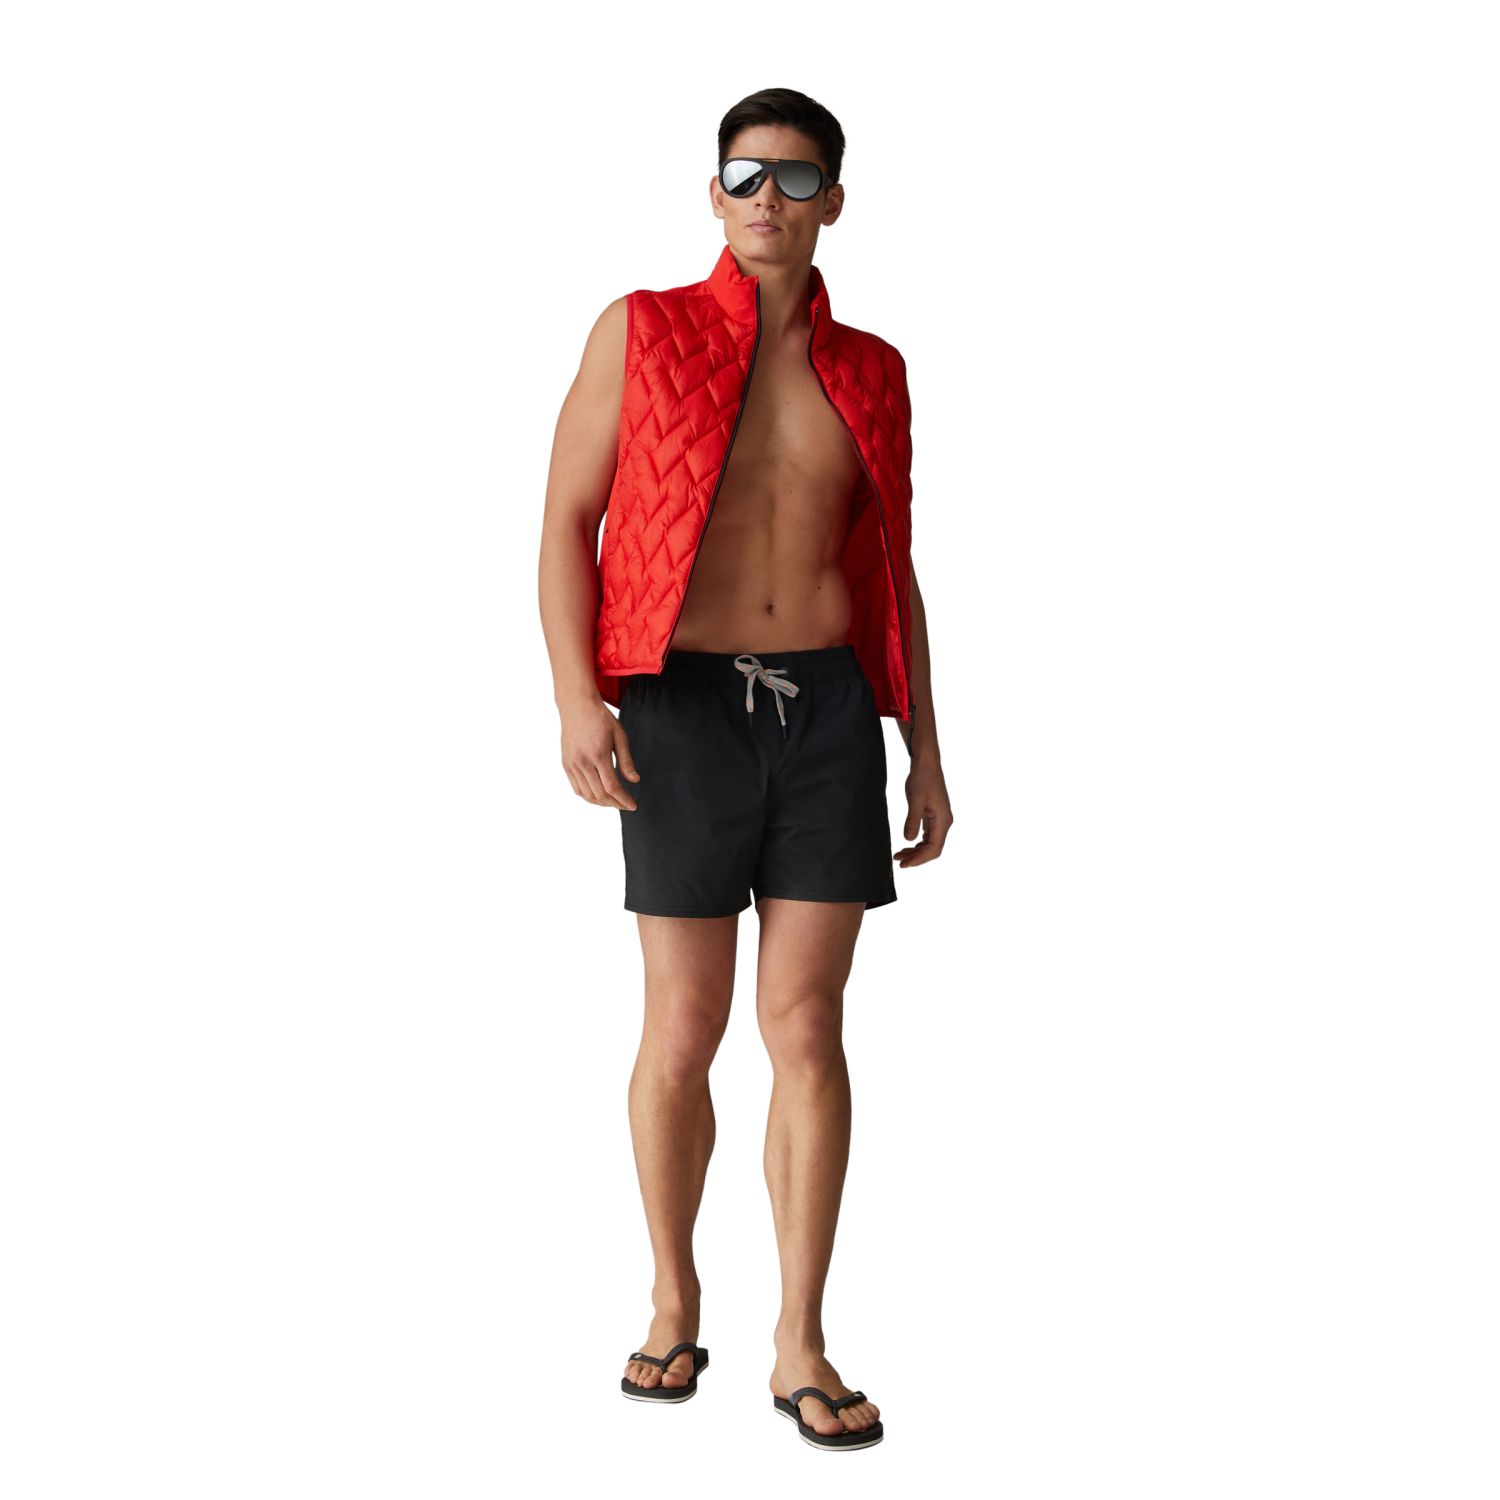 Costume De Baie -  bogner fire and ice NELSON Swim Shorts